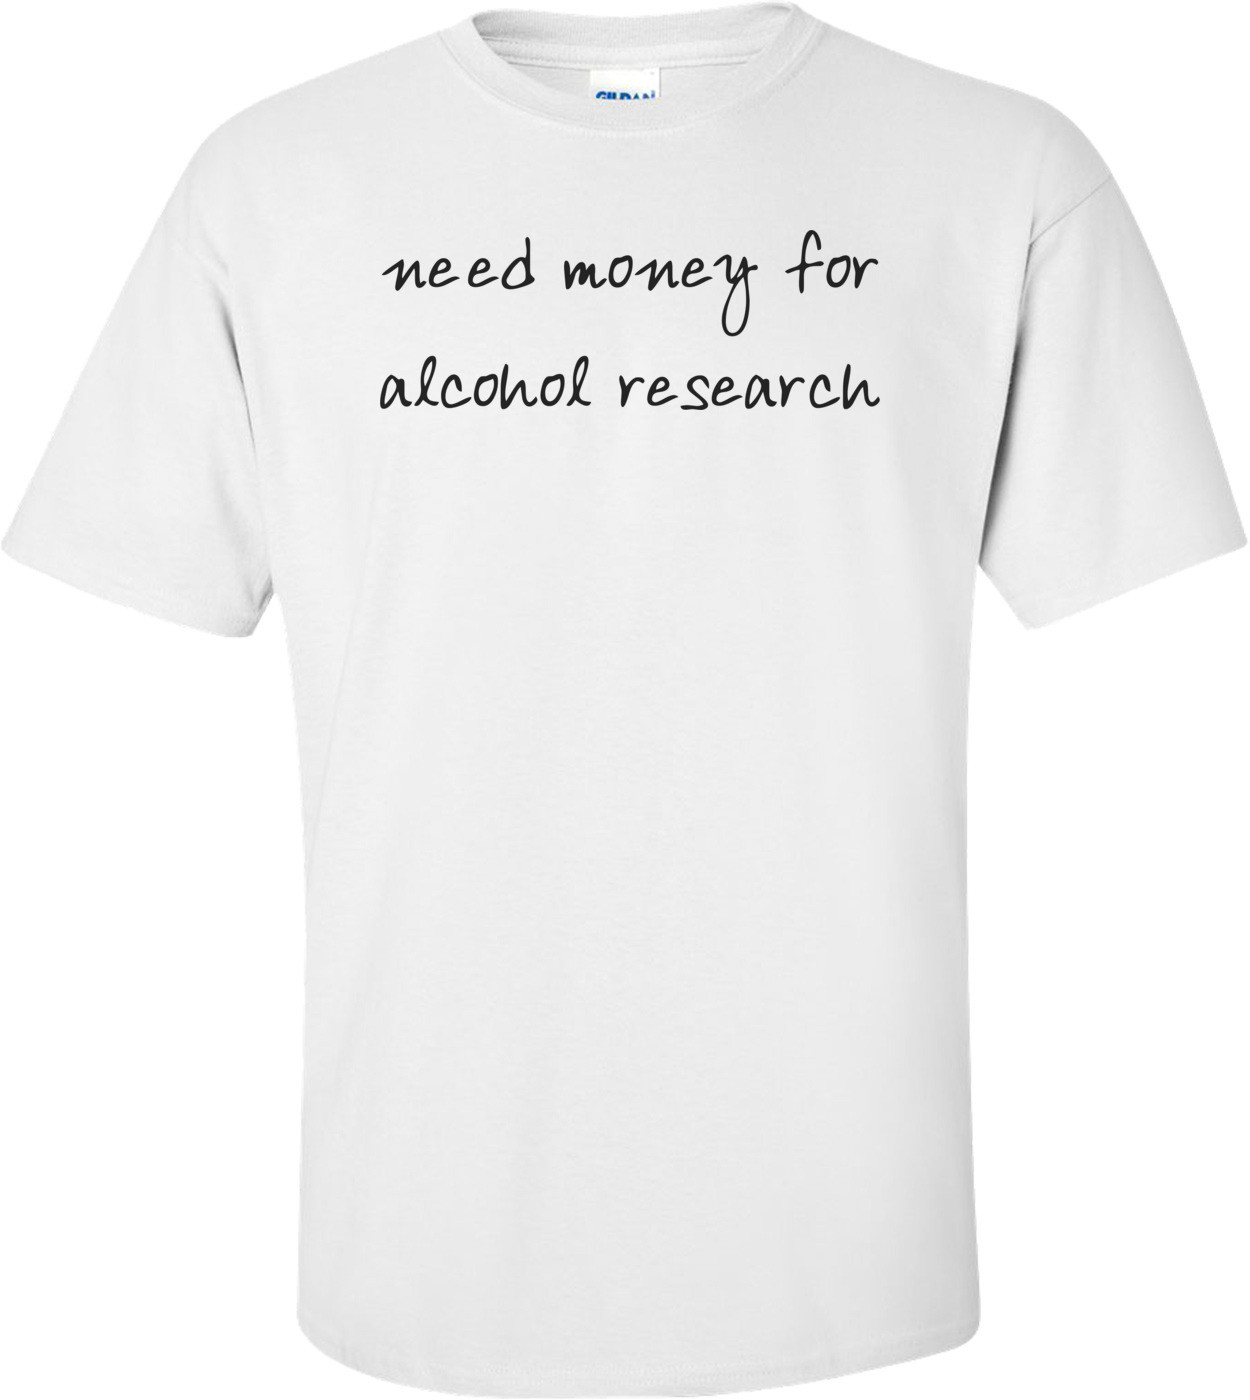 need money for alcohol research